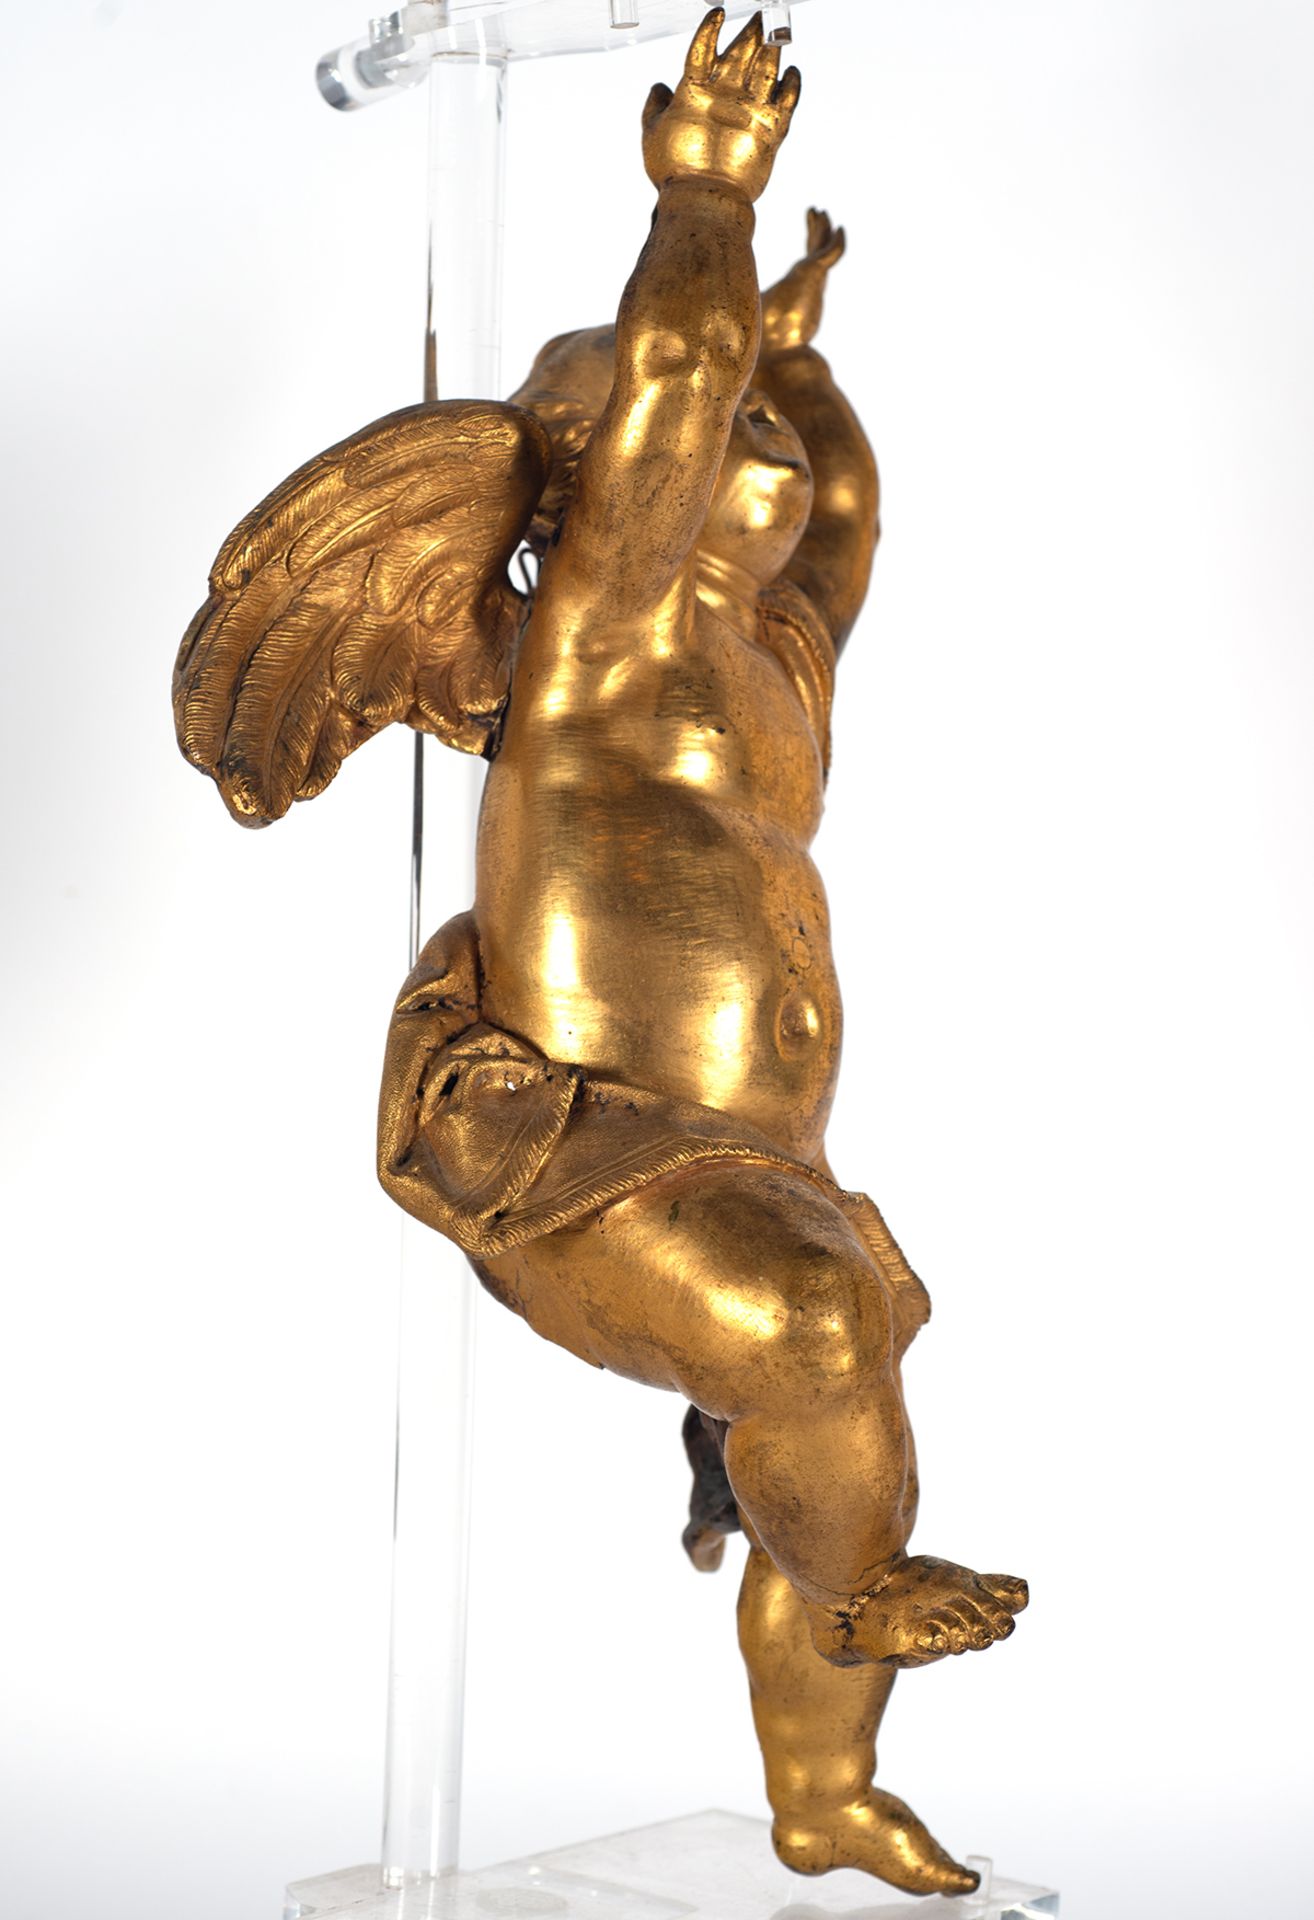 Exceptional pair of angels in gilded bronze, 16th-17th century - Image 8 of 11